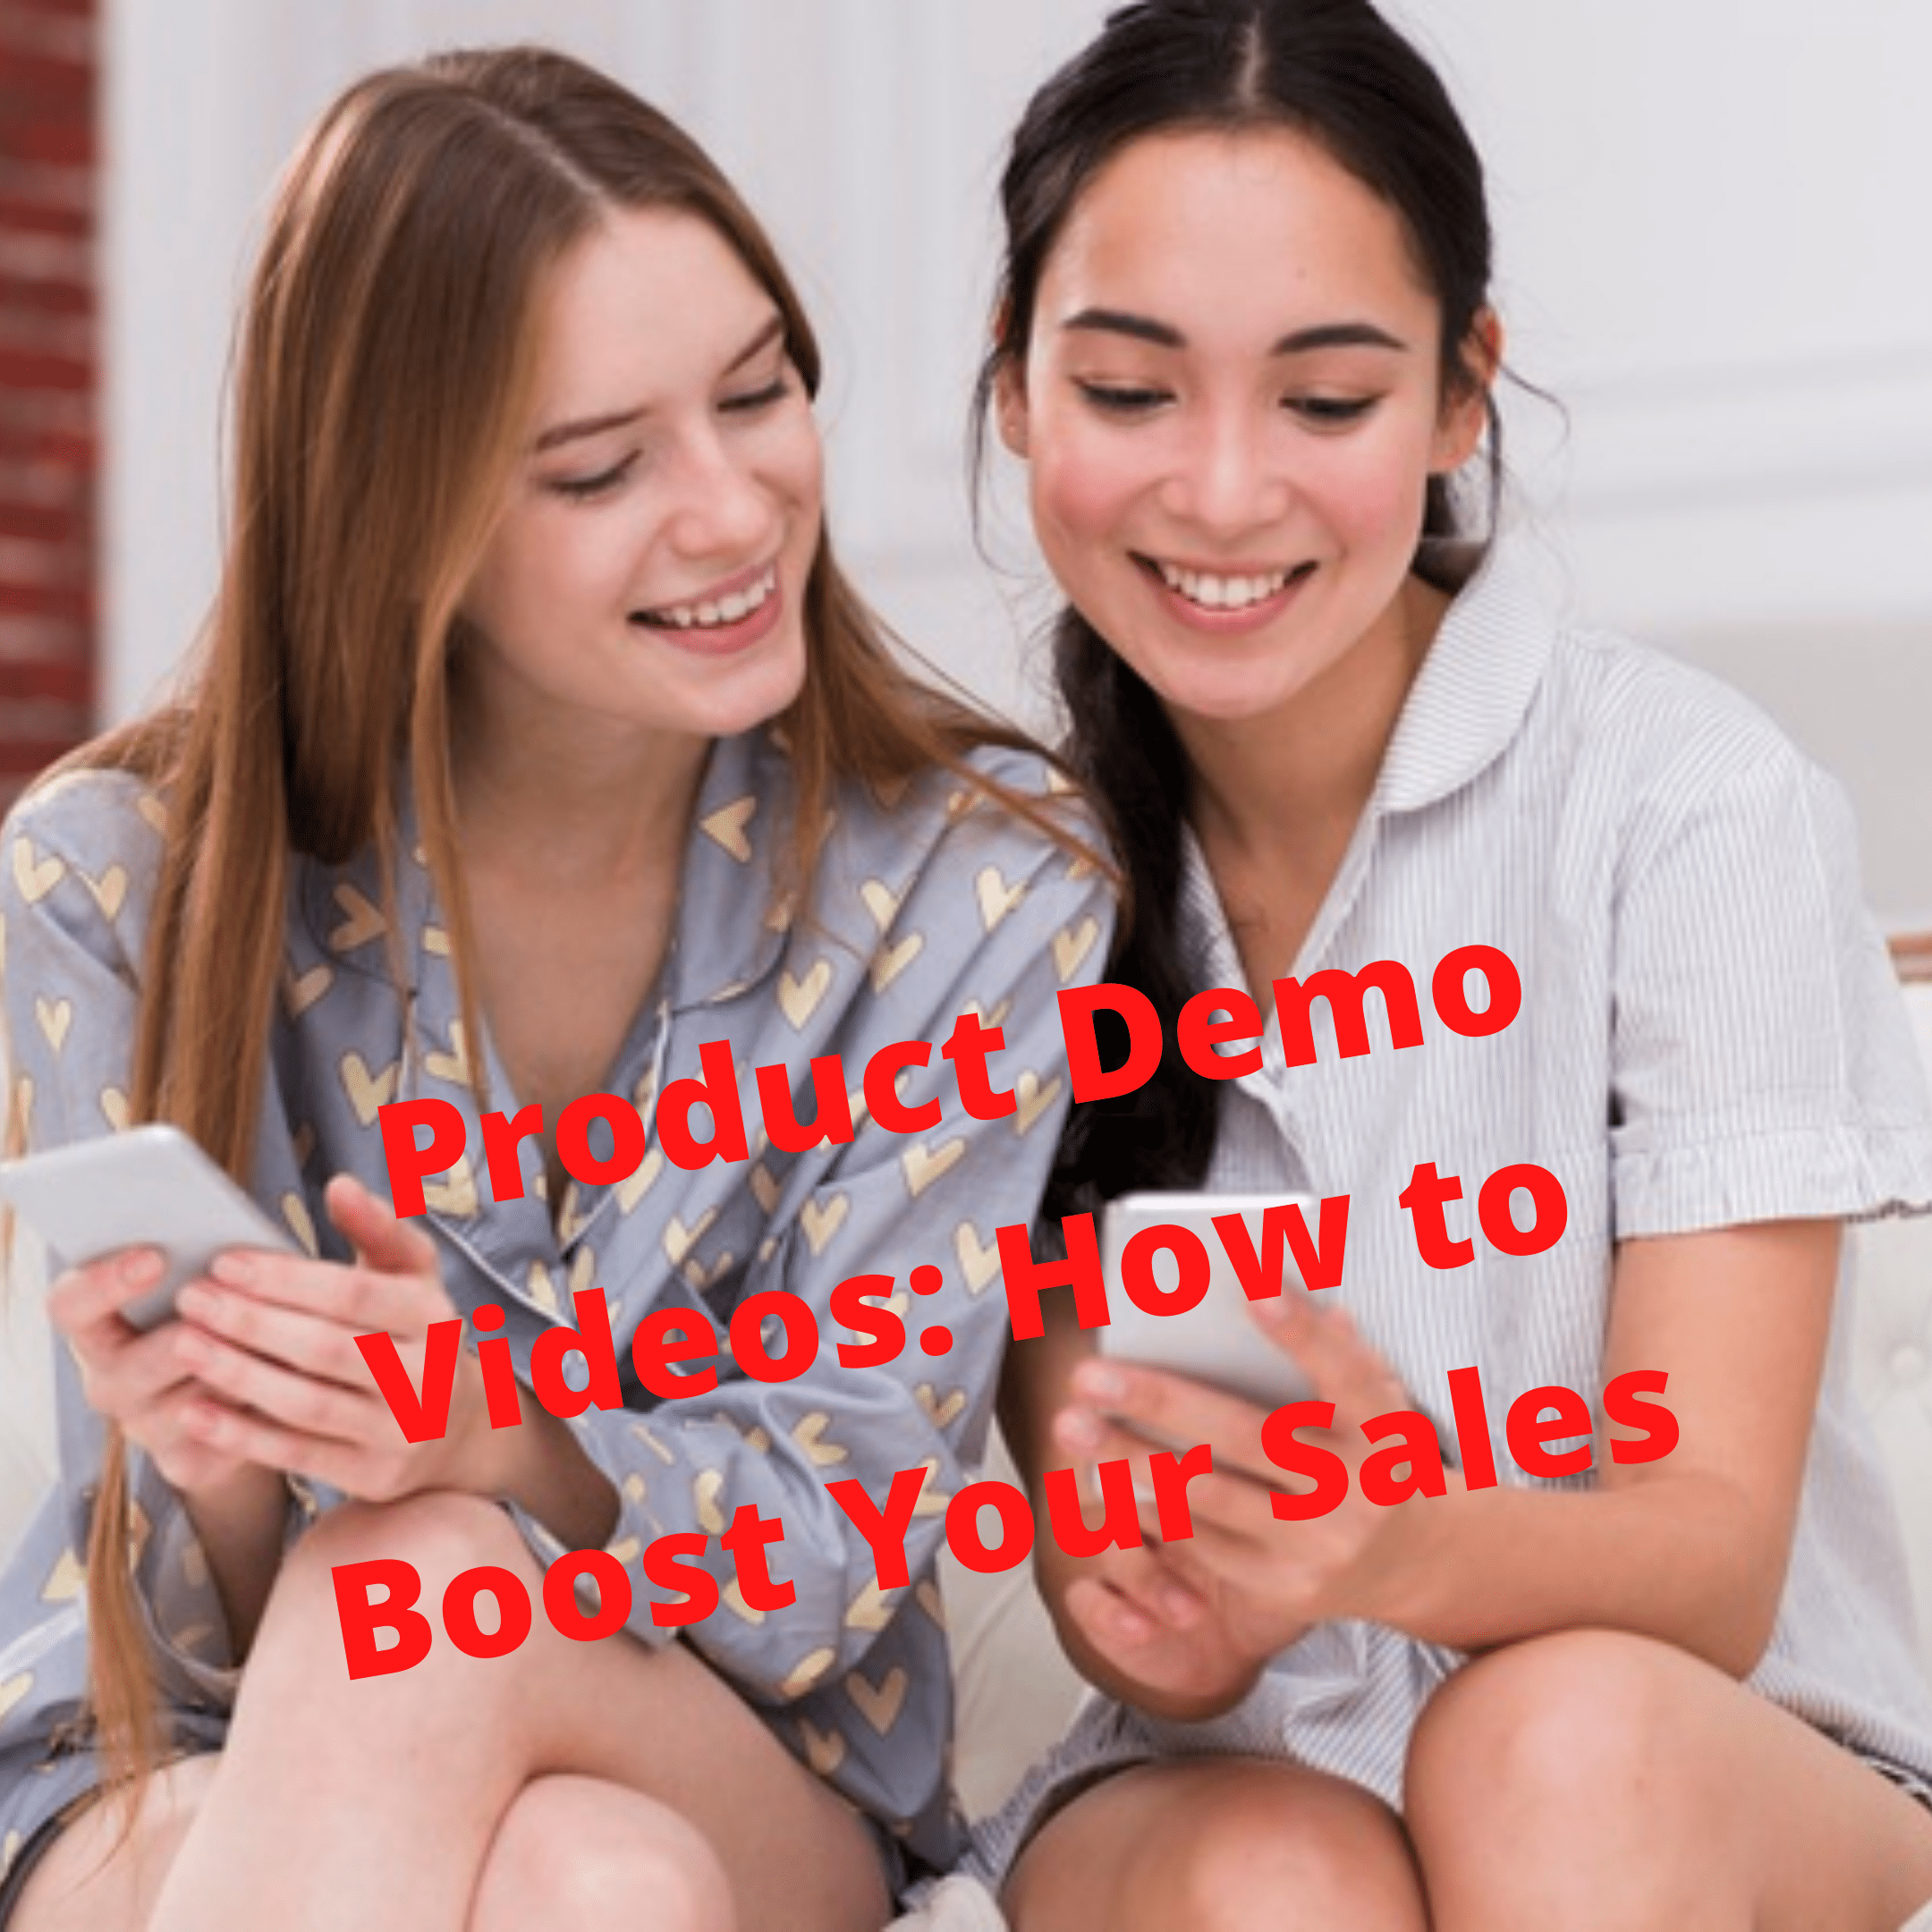 Product Demo Videos: 5 Tips on How to Boost Your Sales
 